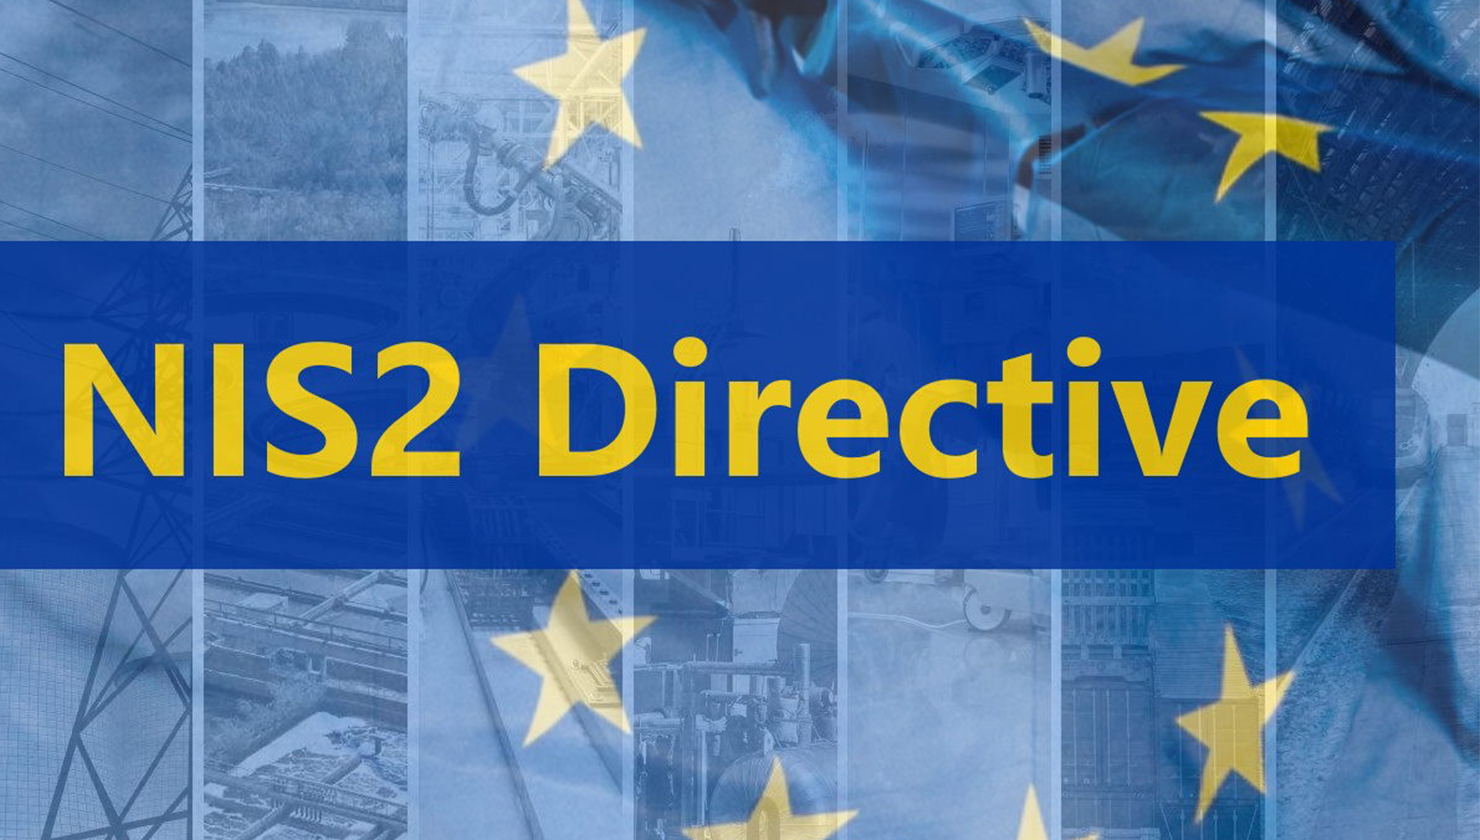 Reviewing the NIS2 Directive of the EU